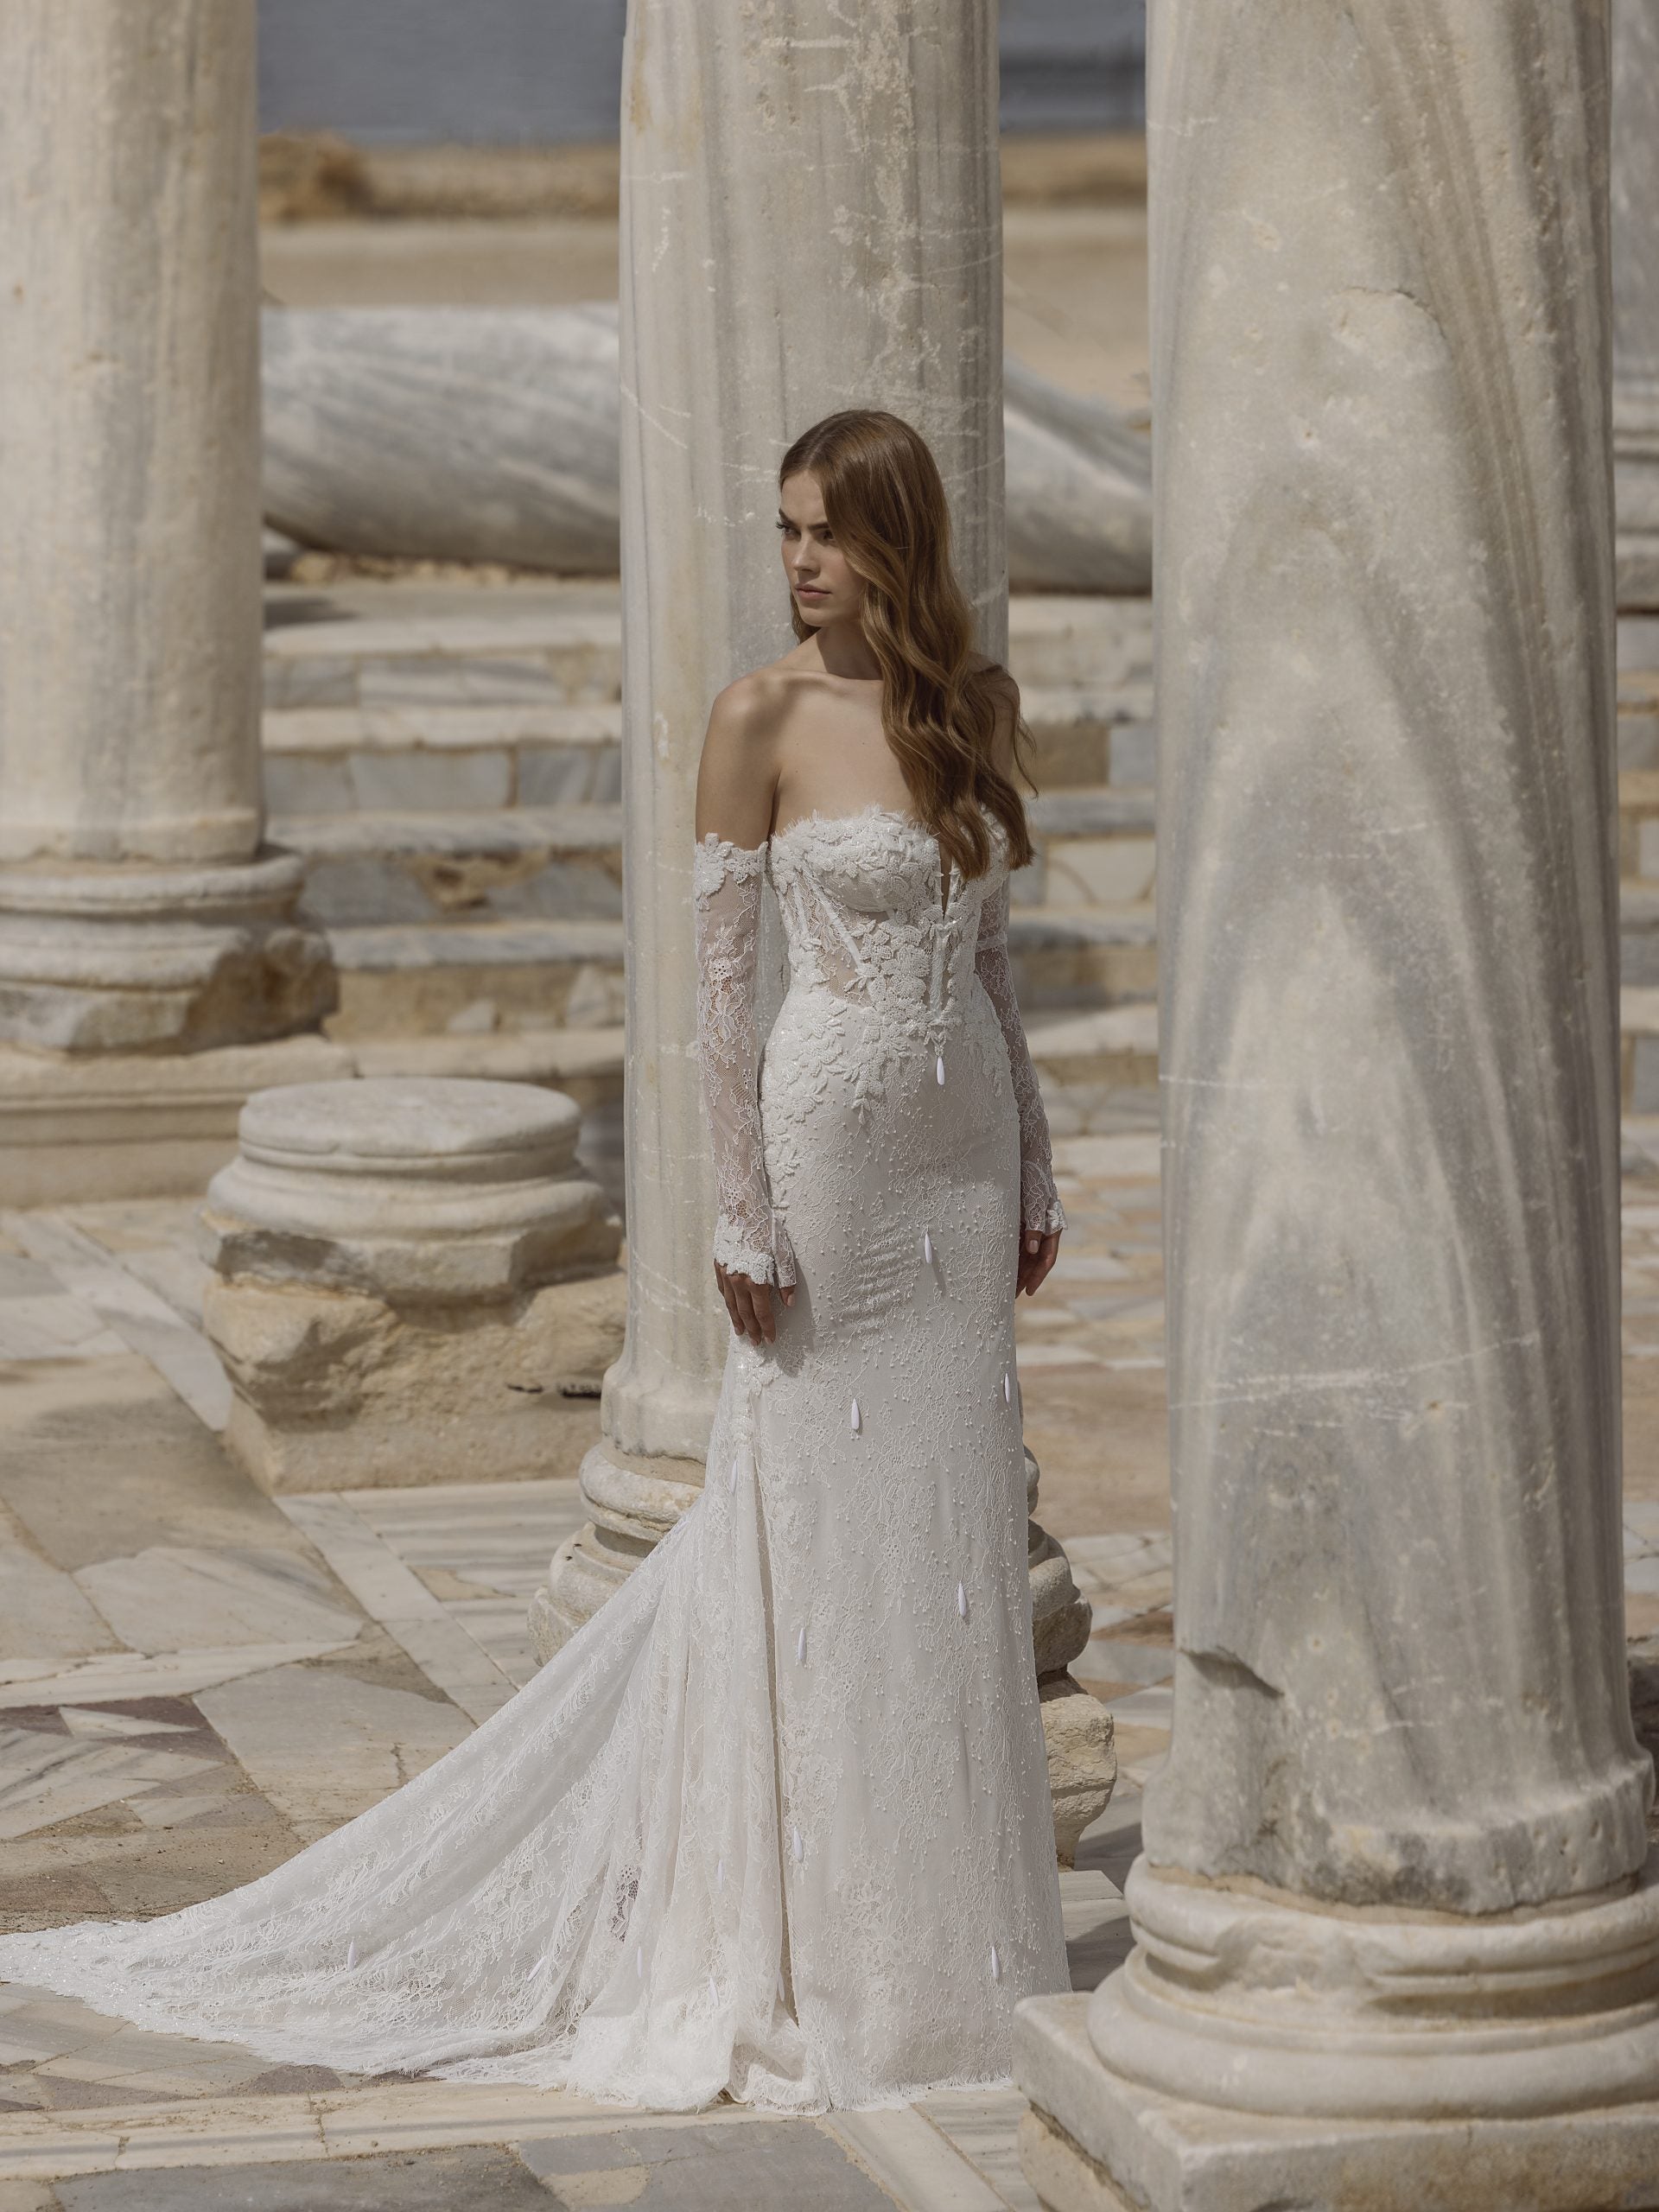 Strapless Lace Fit And Flare Wedding Dress With Detachable Long Sleeves by Love by Pnina Tornai - Image 1